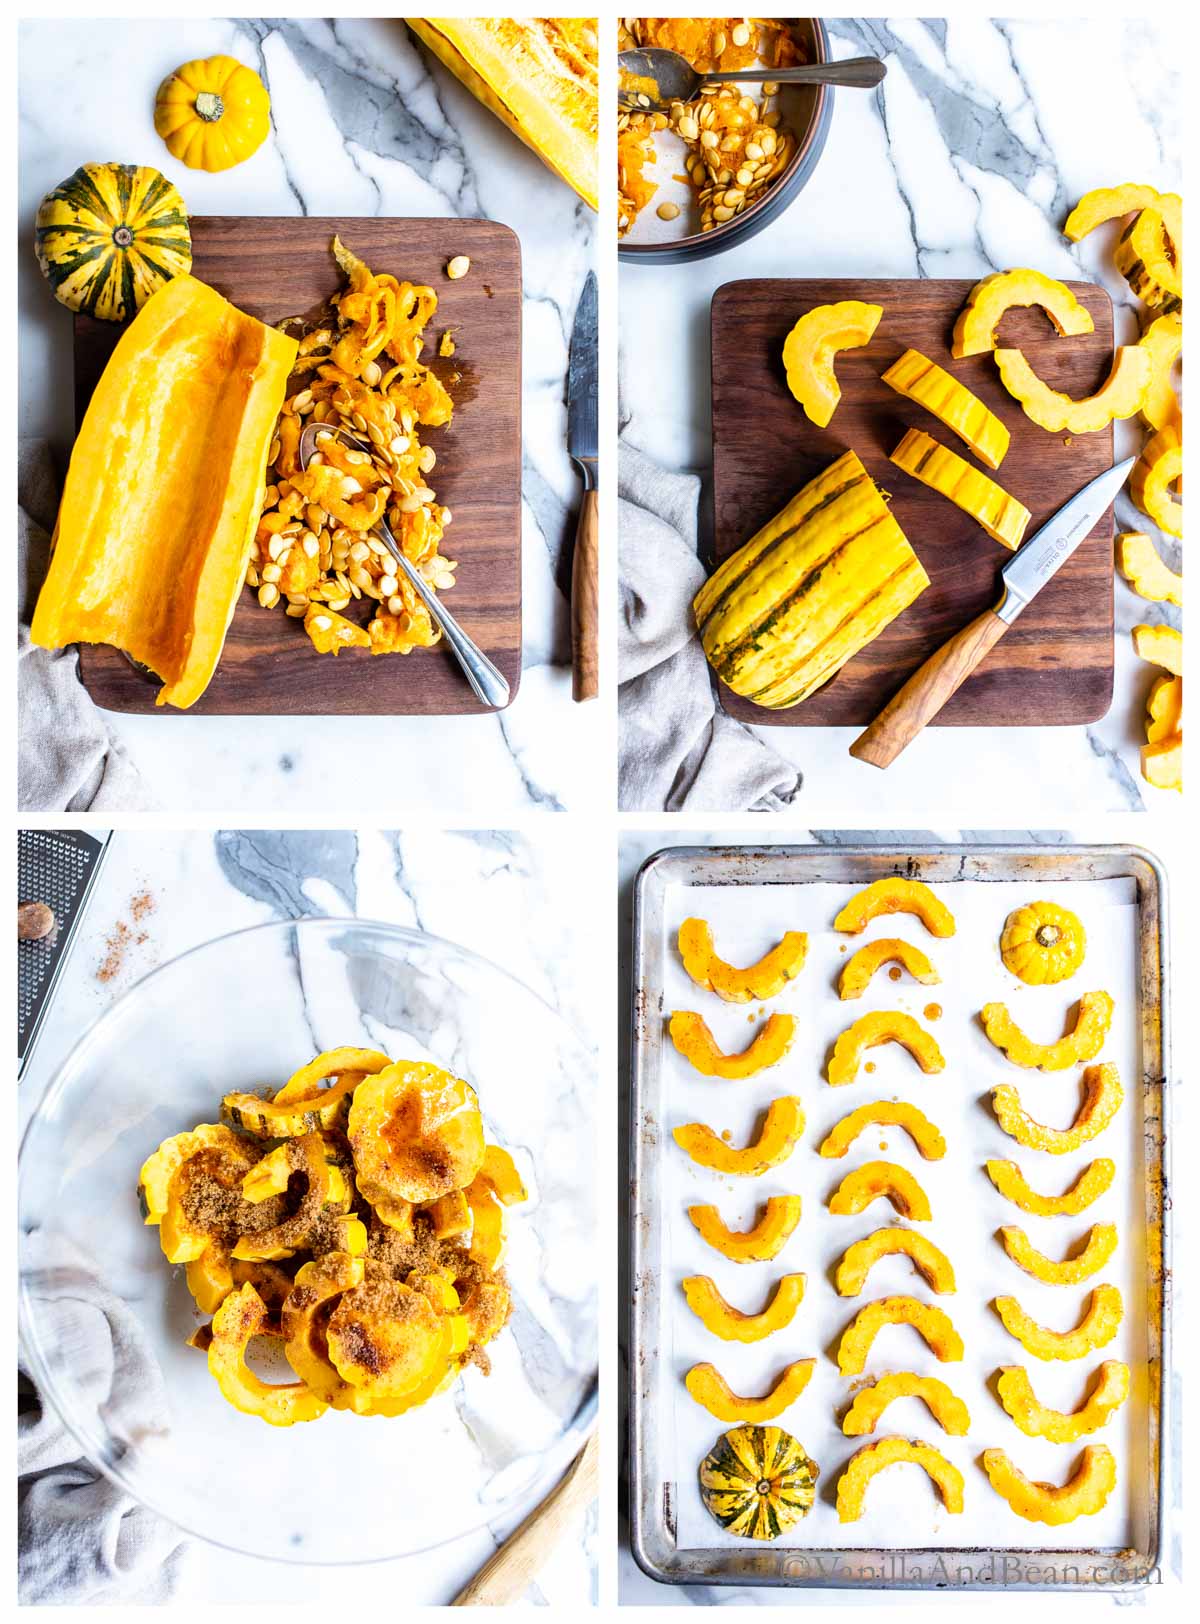 1. Deseeding Winter Squash on a cutting board. 2. Slicing delicata Squash on a cutting board. 3. Delicata squash in a bowl with maple and brown sugar. 4. Sliced squash on a sheet pan.